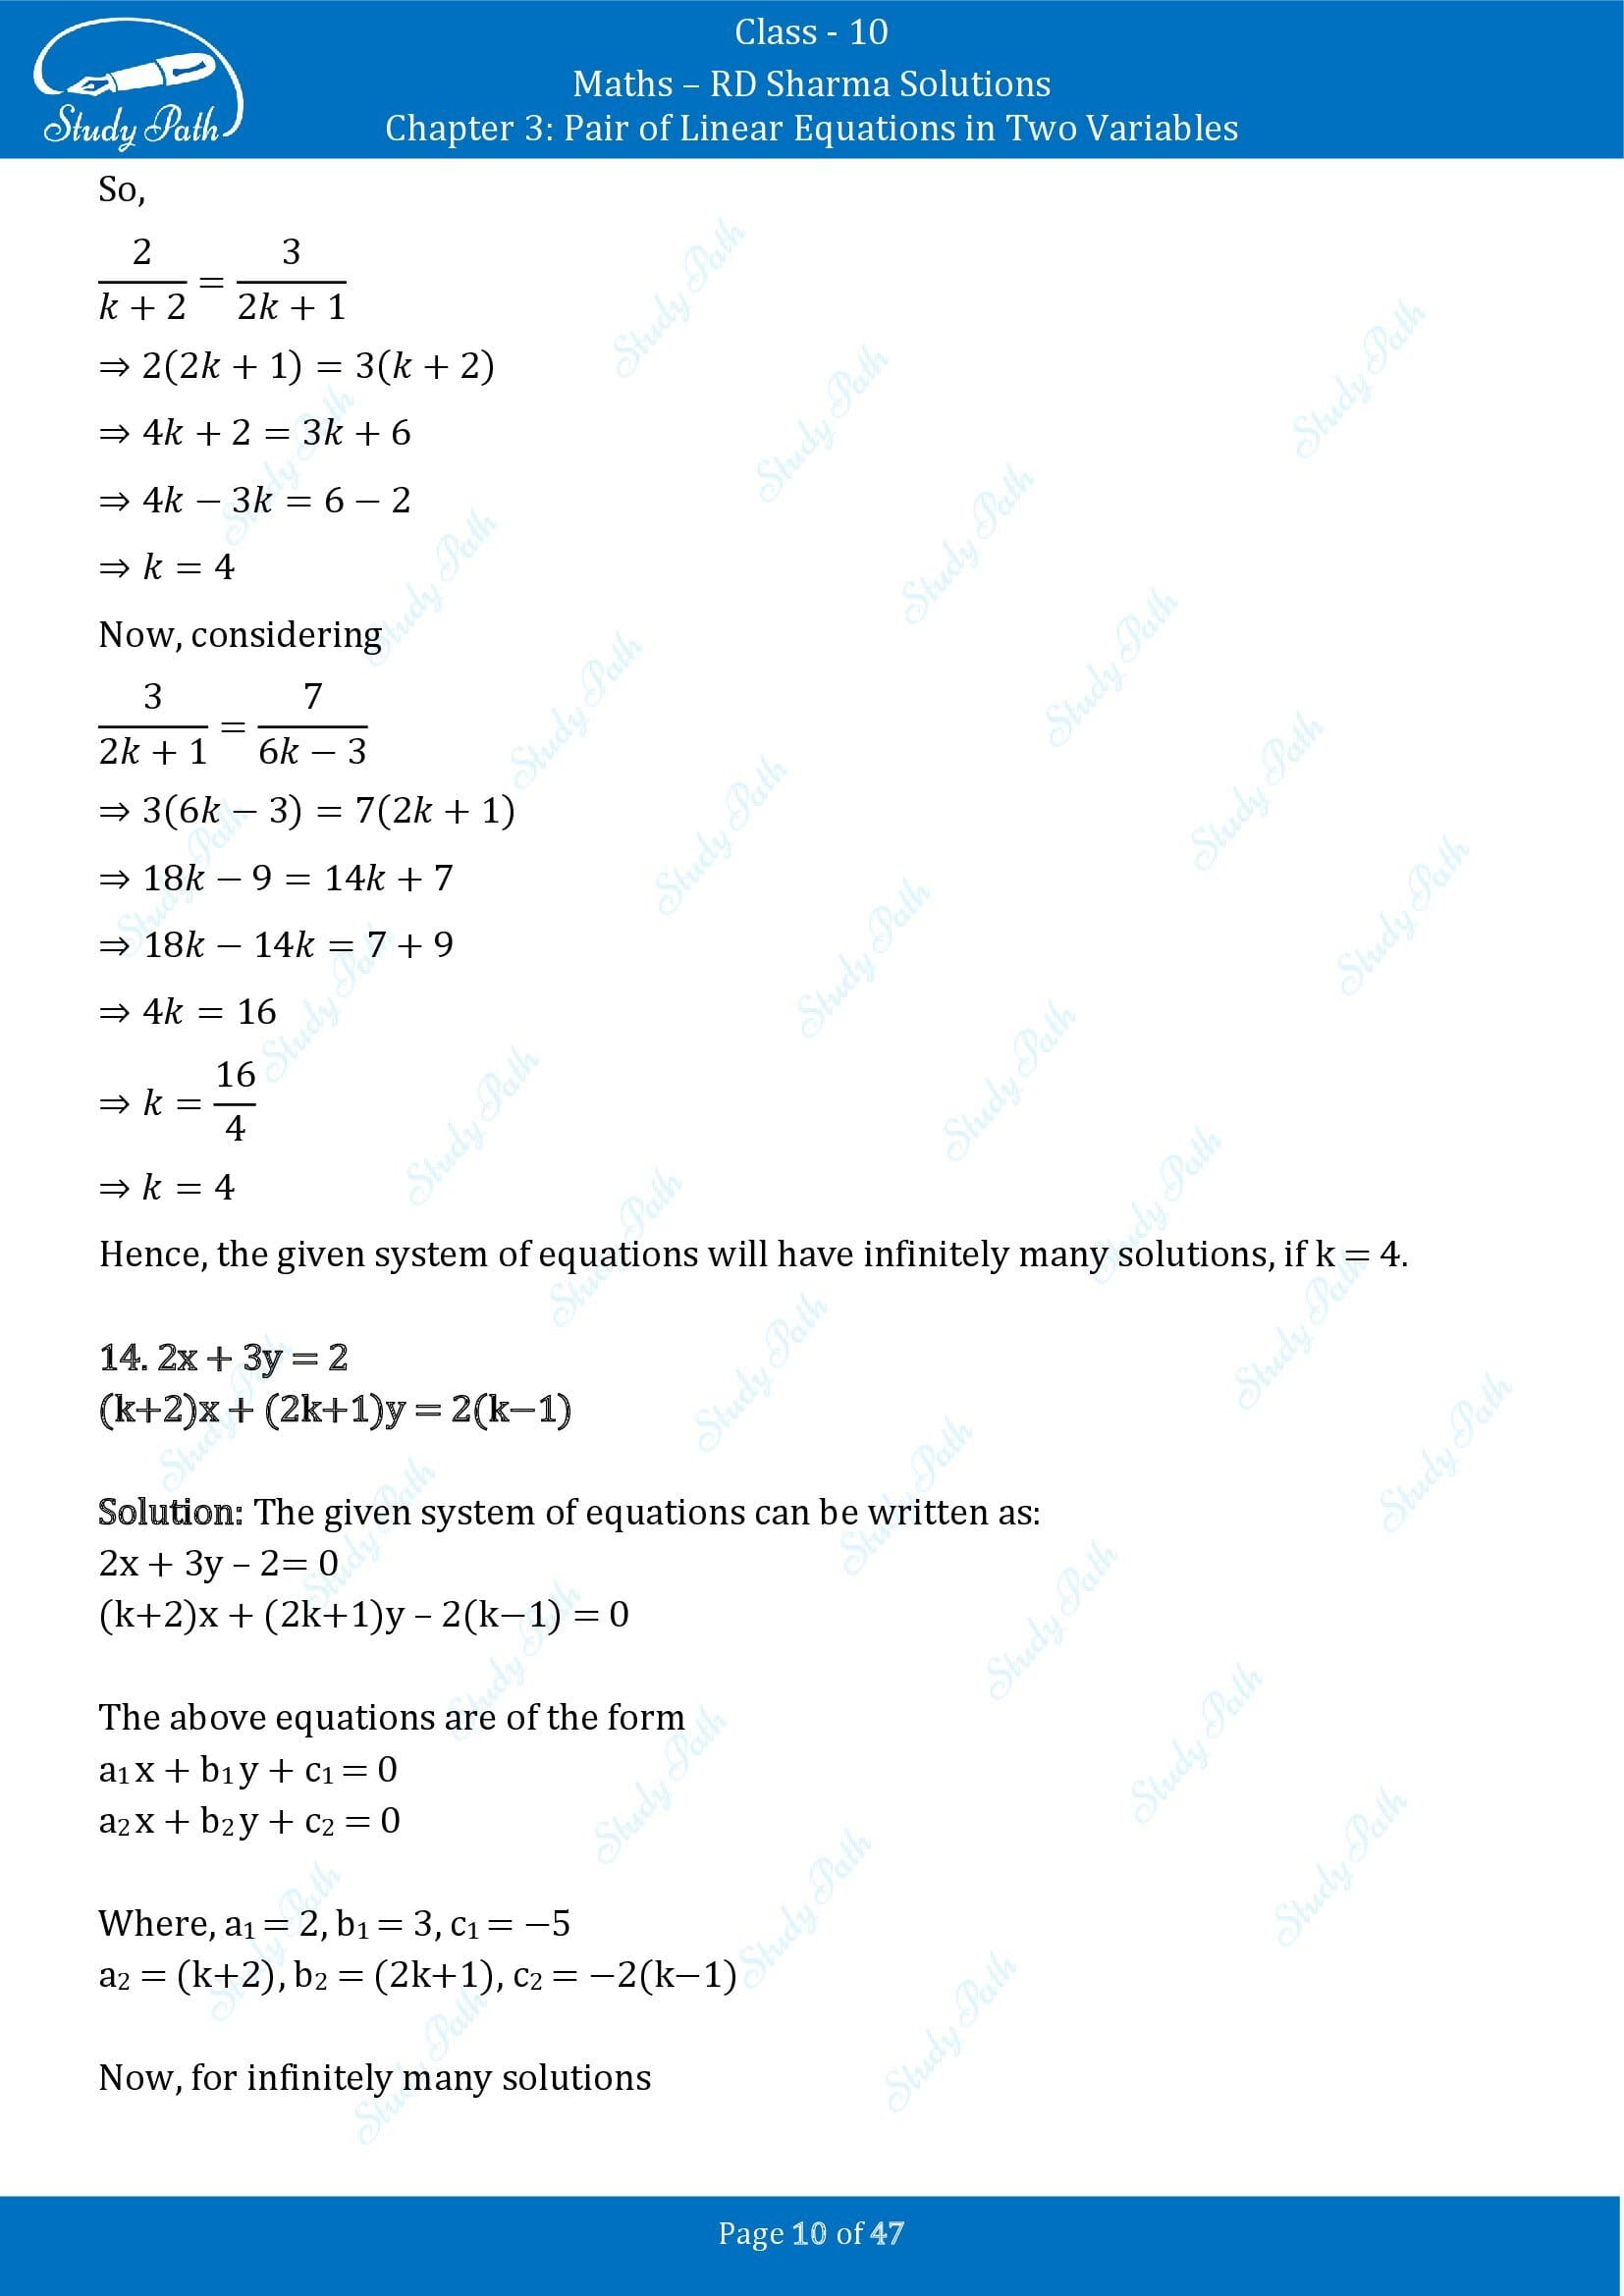 RD Sharma Solutions Class 10 Chapter 3 Pair of Linear Equations in Two Variables Exercise 3.5 00010